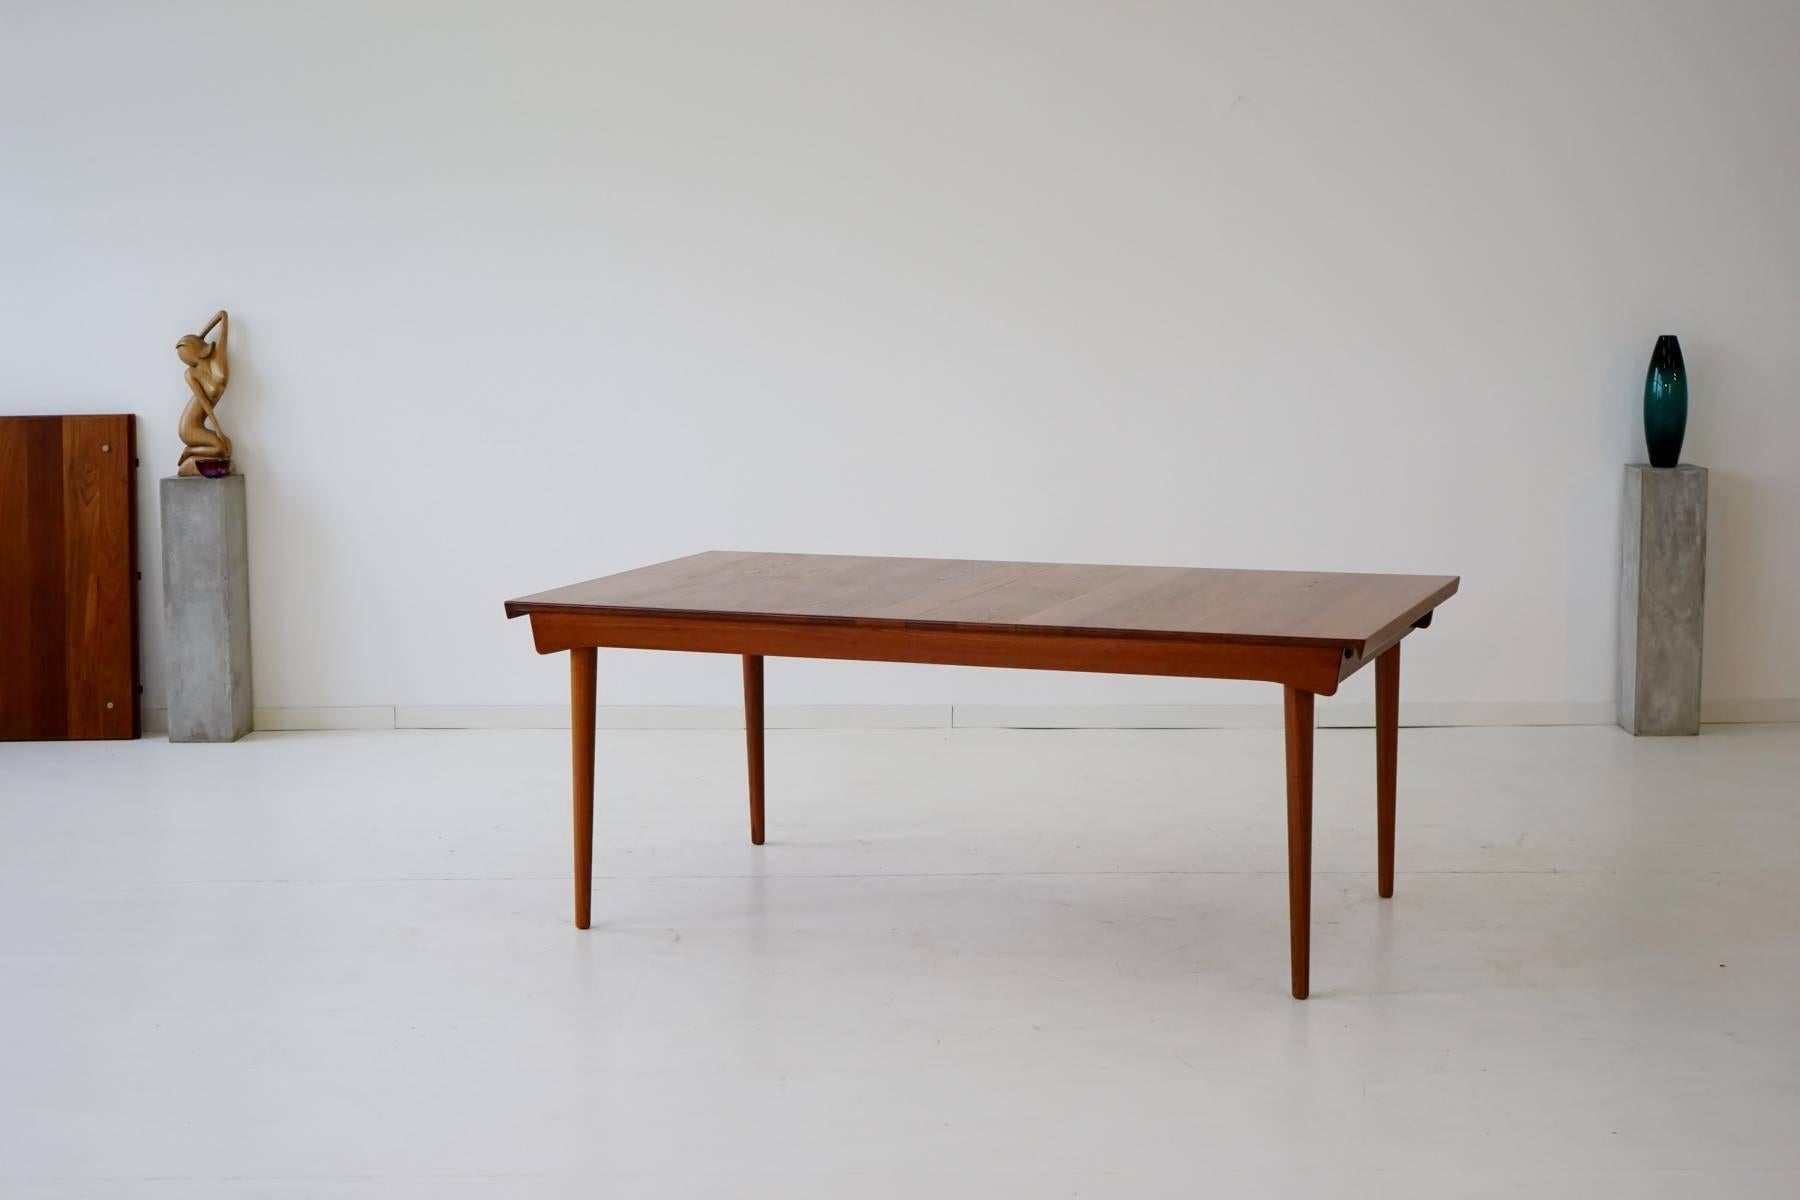 Finn Juhl extendable dining table teak France søn, Denmark, 1960s
This dining table was designed in 1963 by Finn Juhl. It is made of solid teak wood and extendable up to 285 cm. Two additional leaves (each 50 cm, store under the tabletop) are used